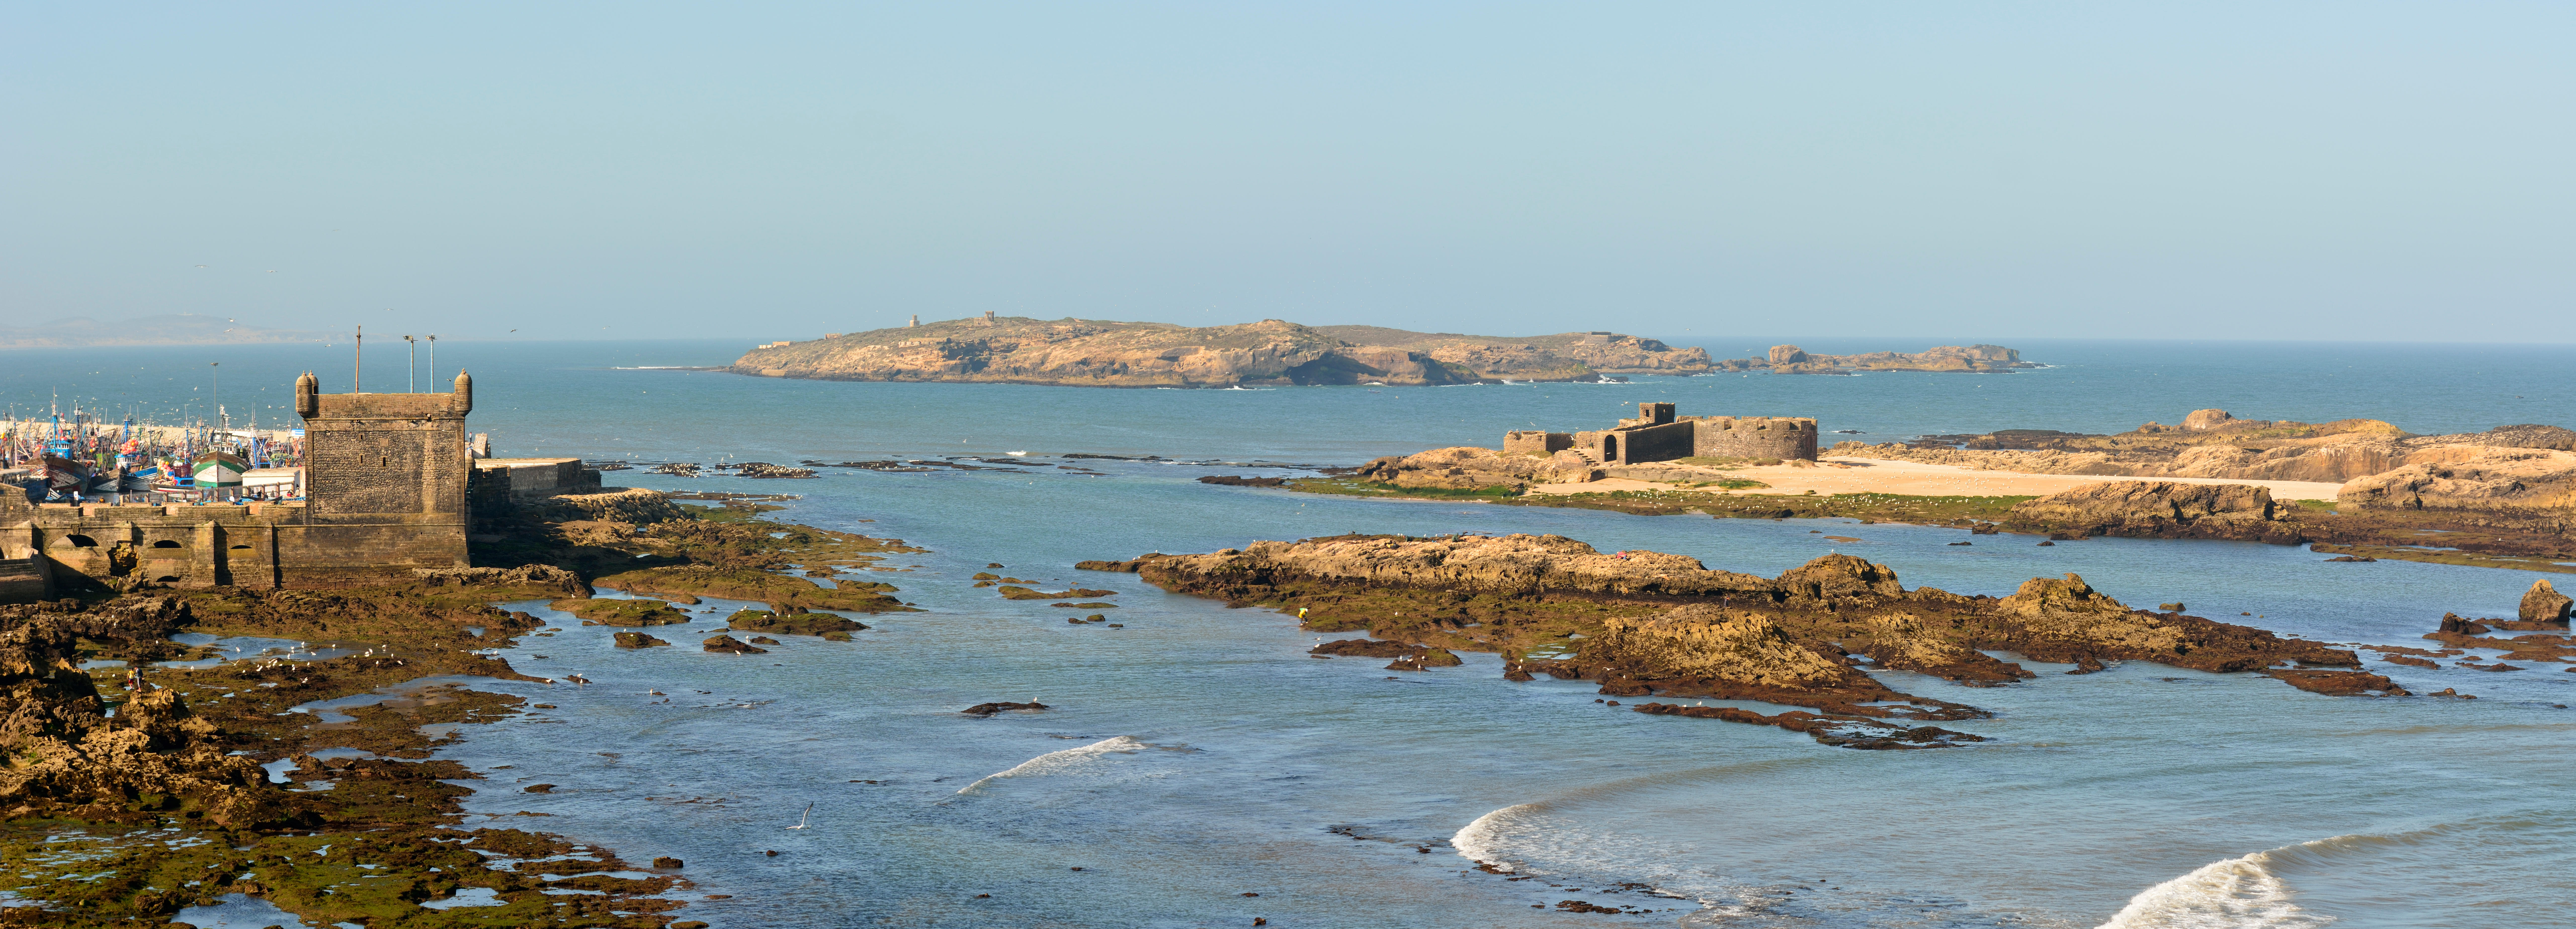 The Île de Mogador is formed of two main islands as well as several tiny islets